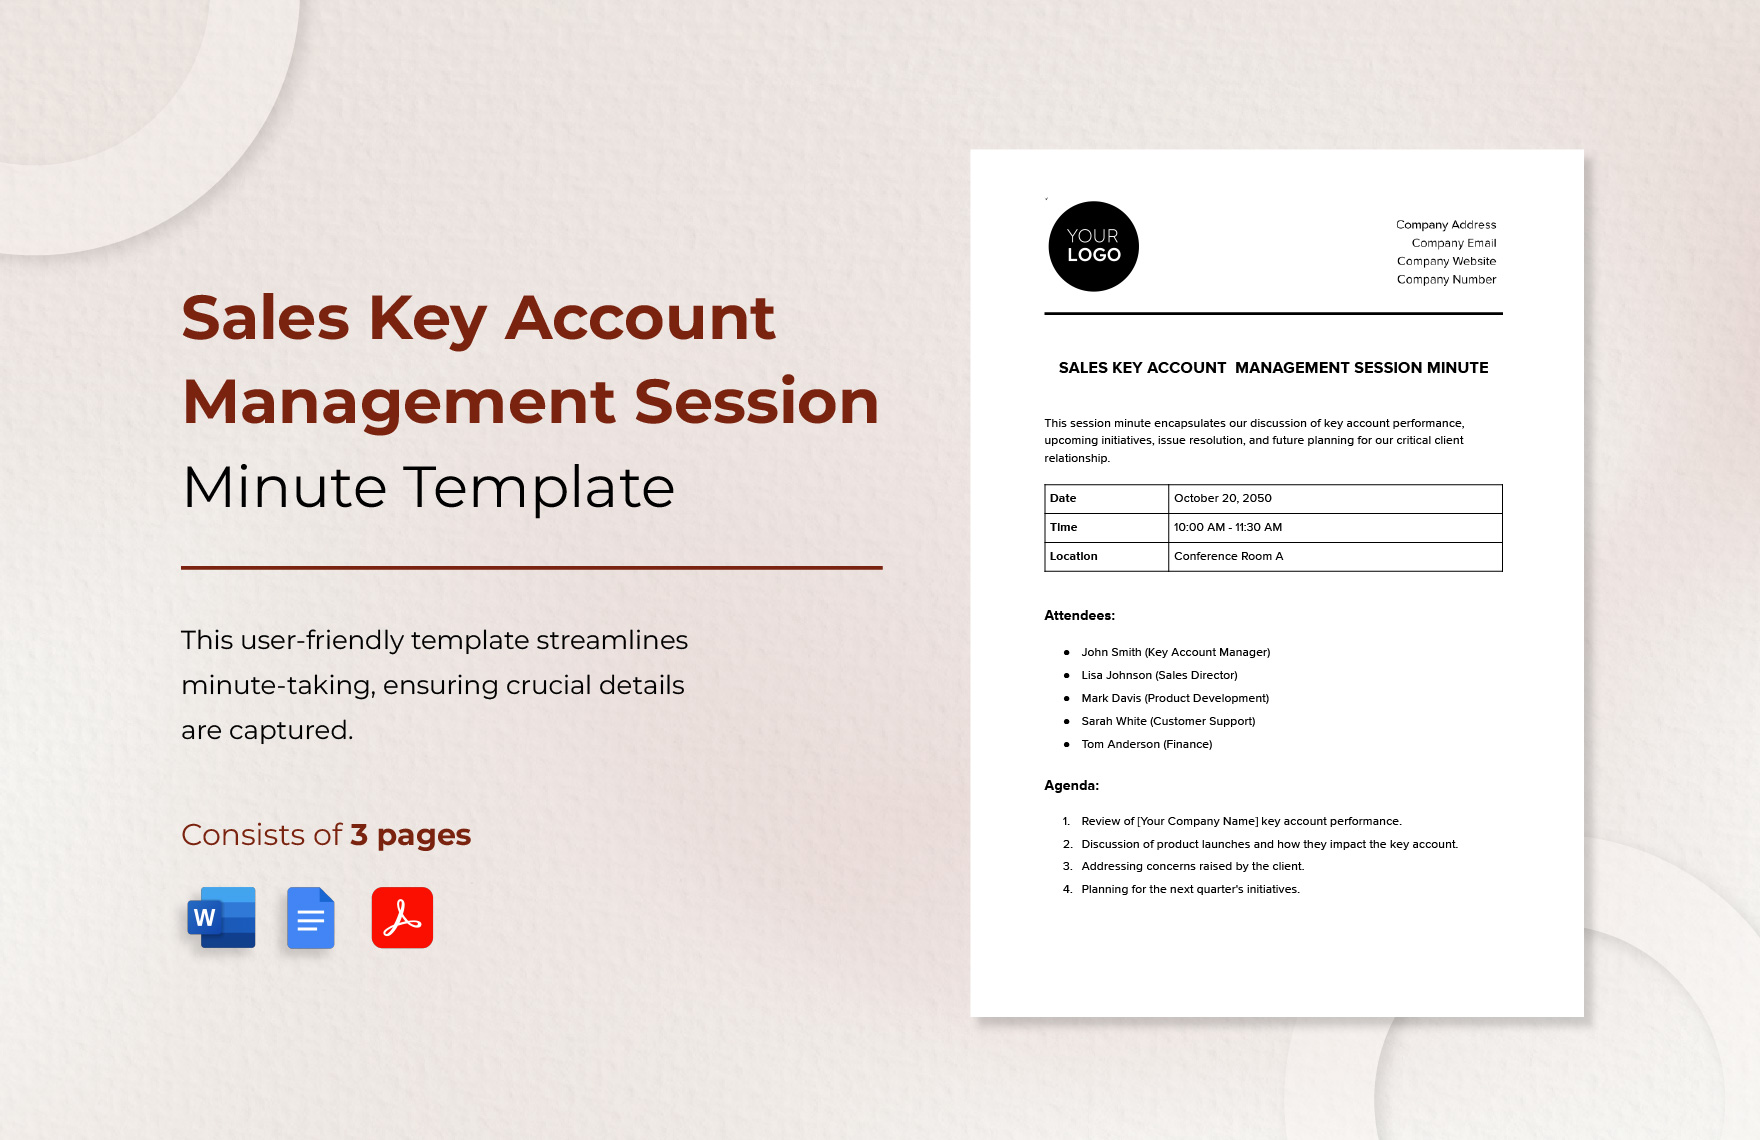 Sales Key Account Management Session Minute Template in Word, Google Docs, PDF